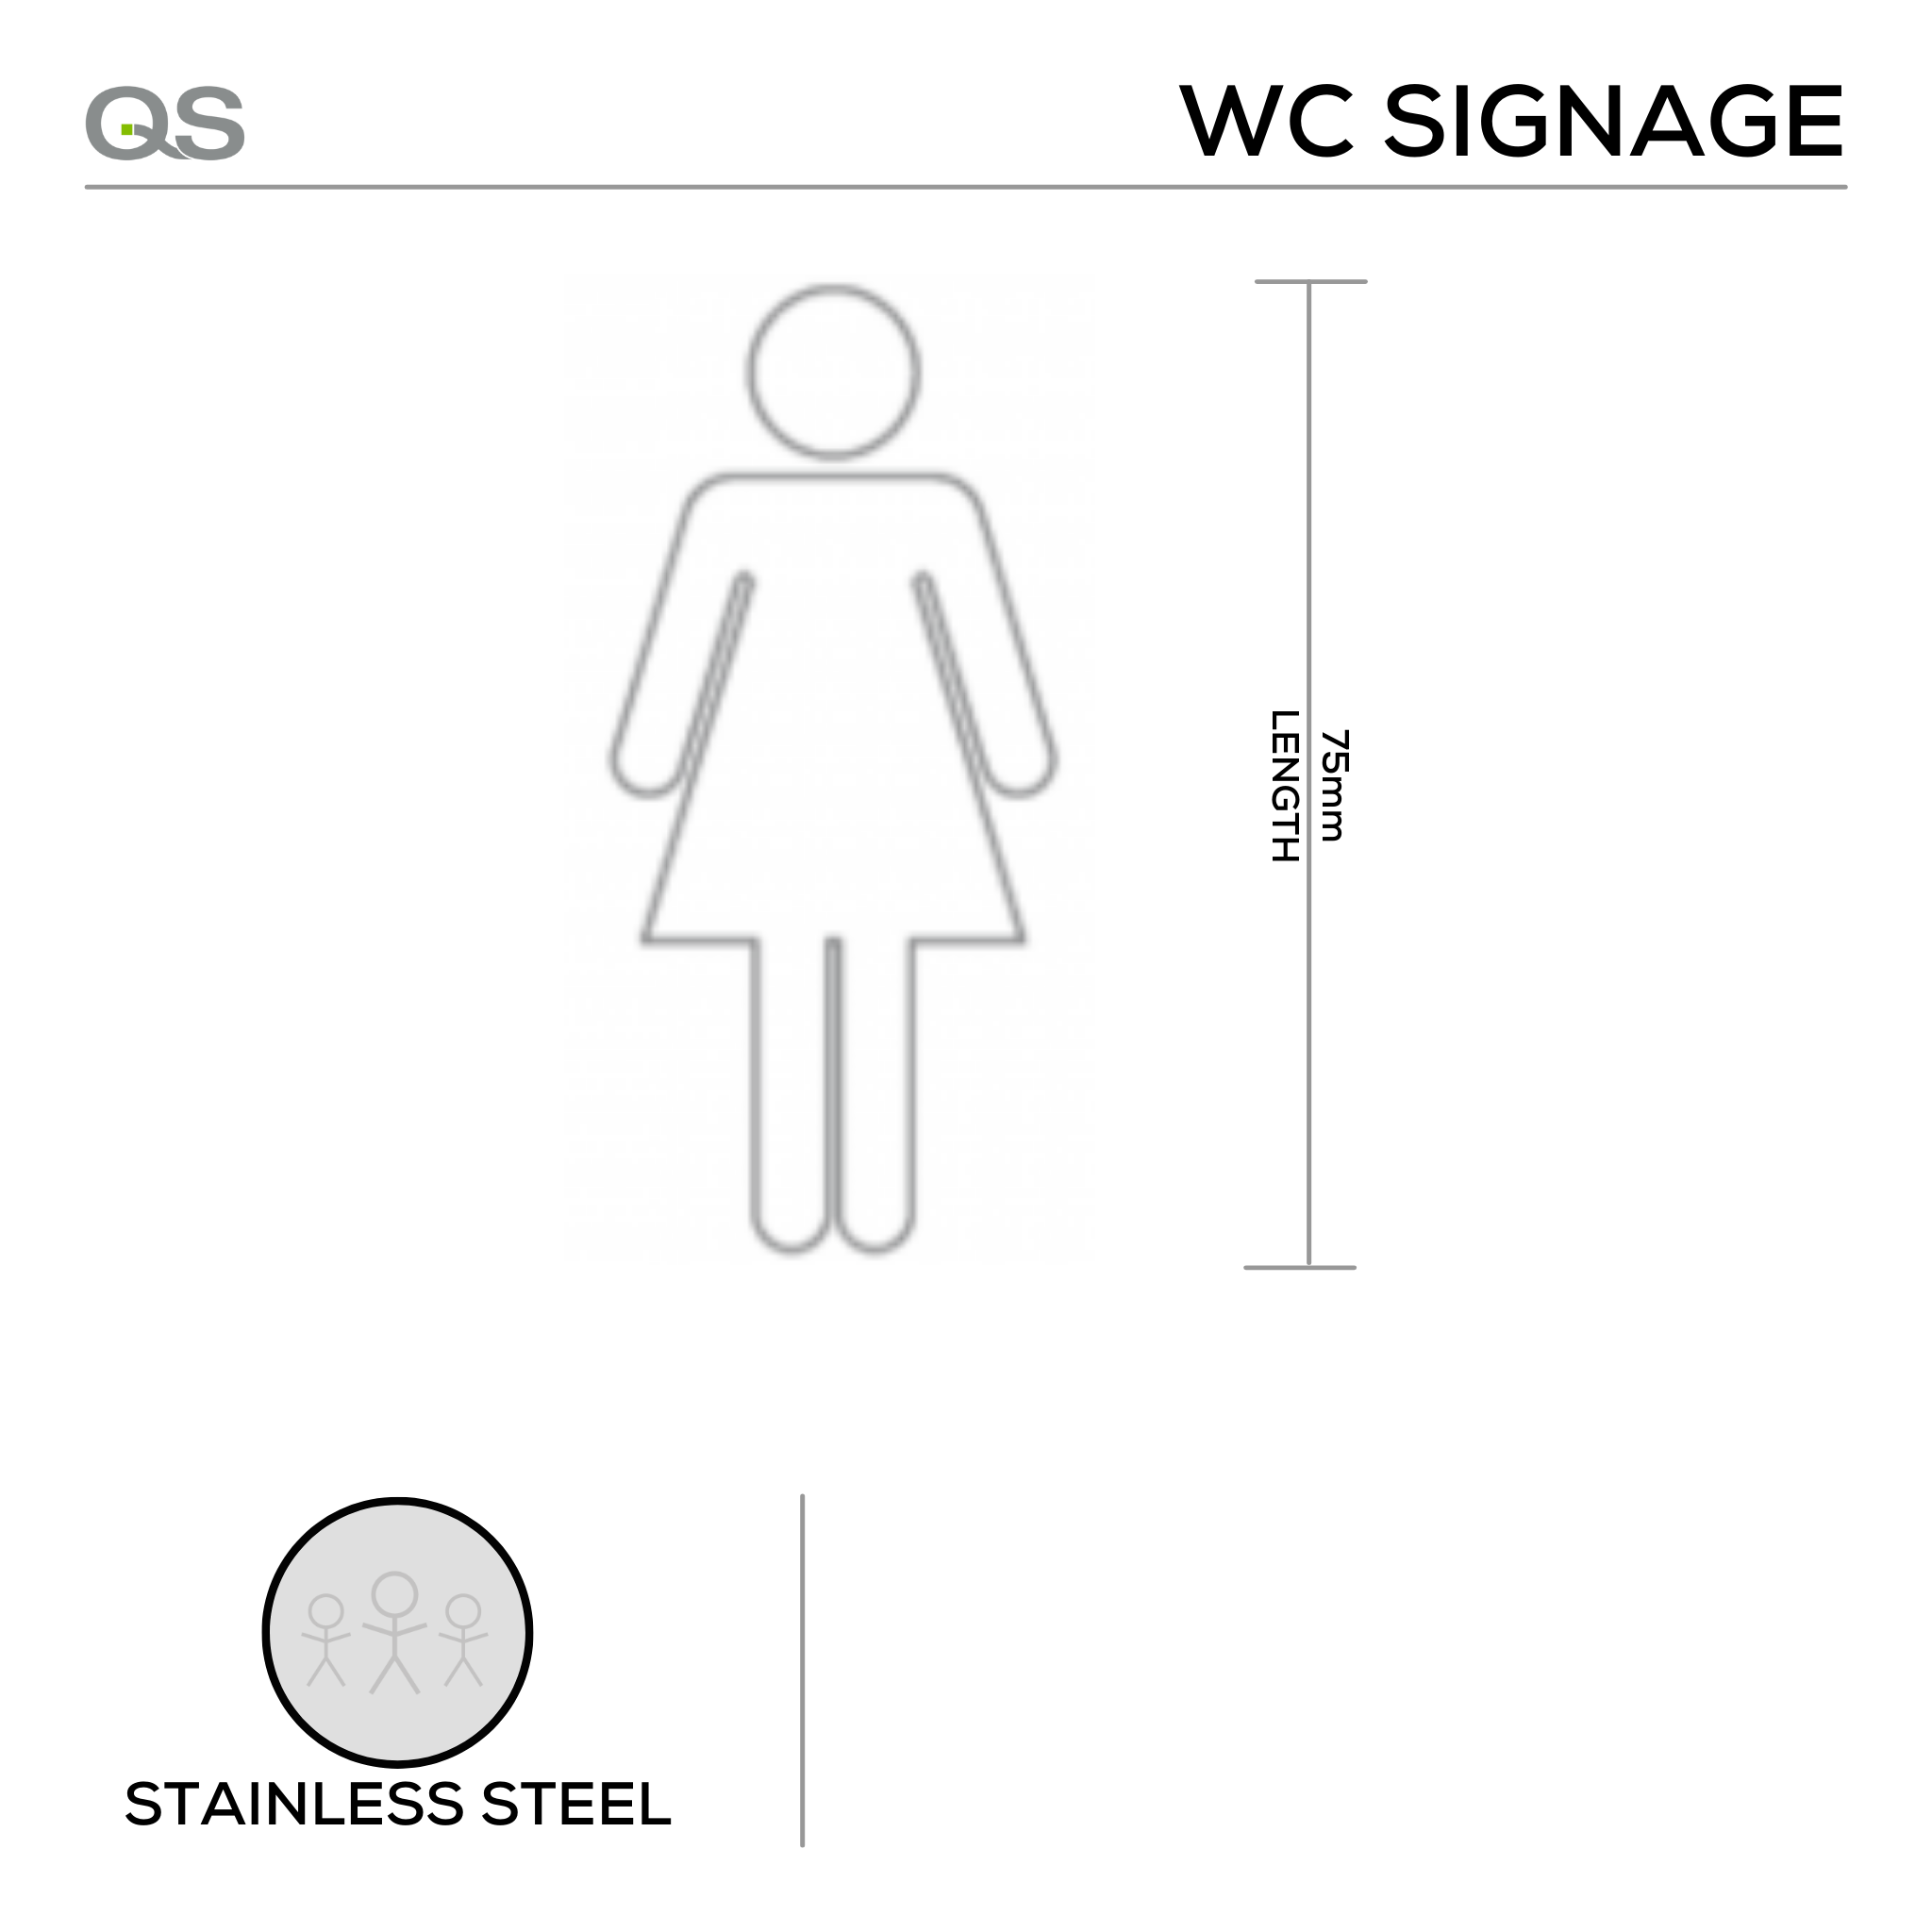 Female, Round, Laser Cut, Sign, 75mm x 75mm, Stainless Steel, QS